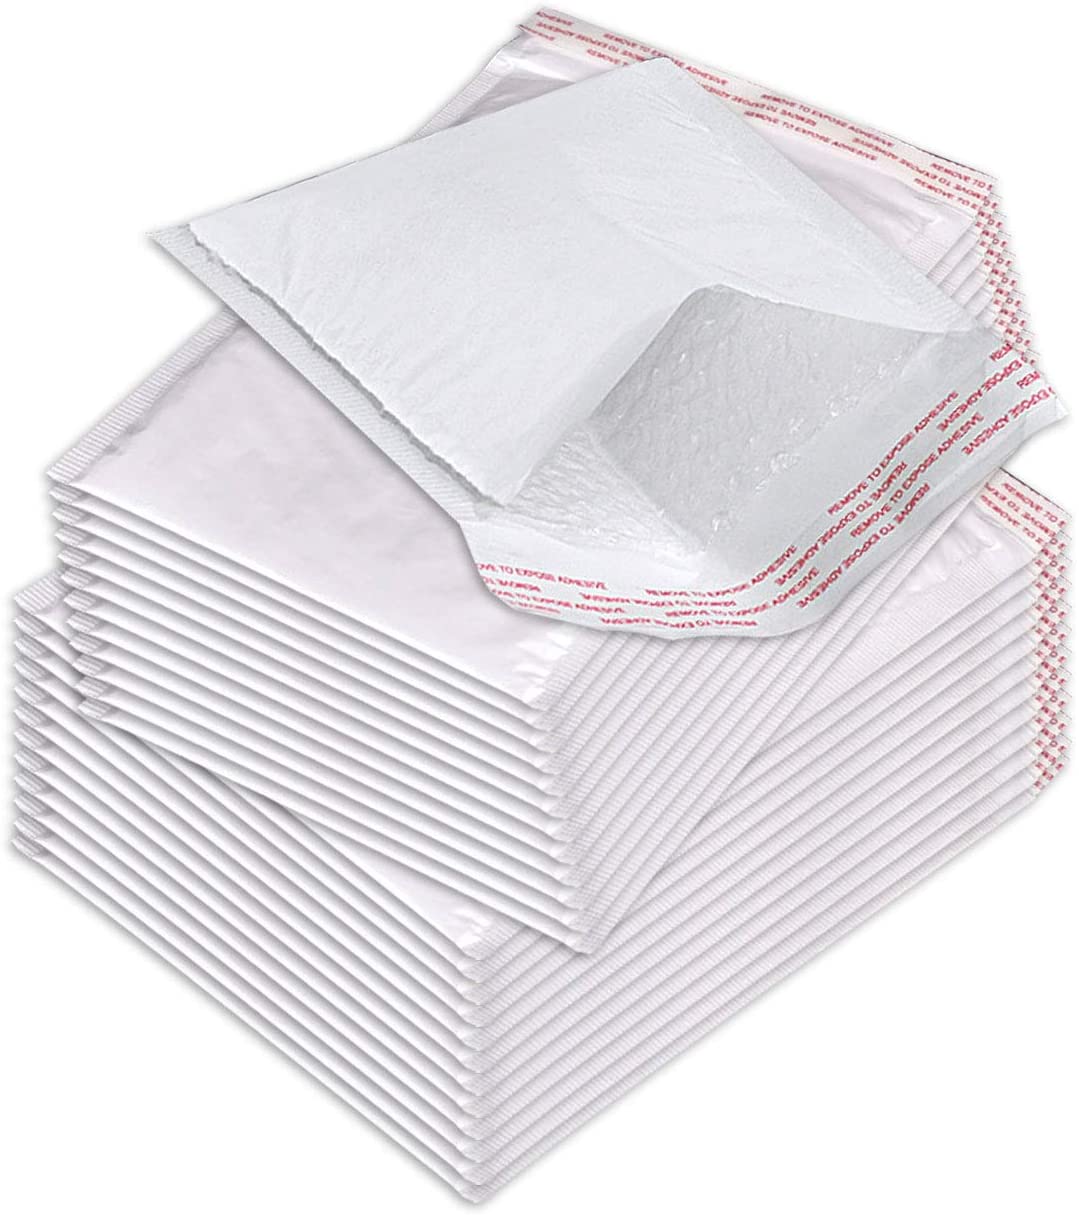 25 Pack 12.5" X 18" #6 Poly Bubble Mailers Envelopes Padded Shipping Bags